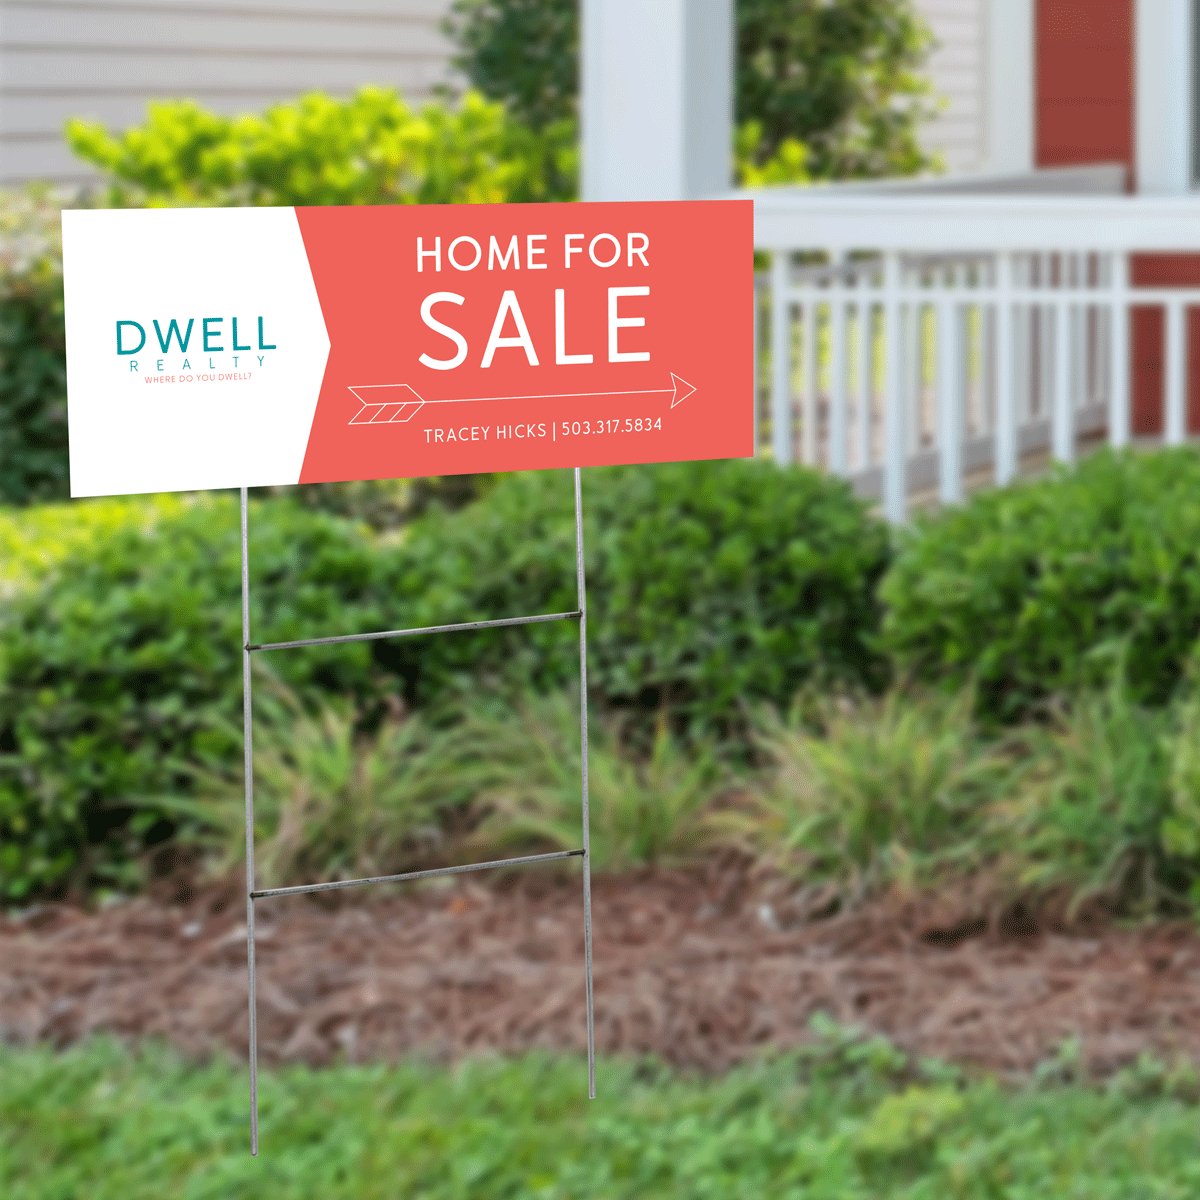 Personalized DWELL Real Estate Directionals - All Things Real Estate